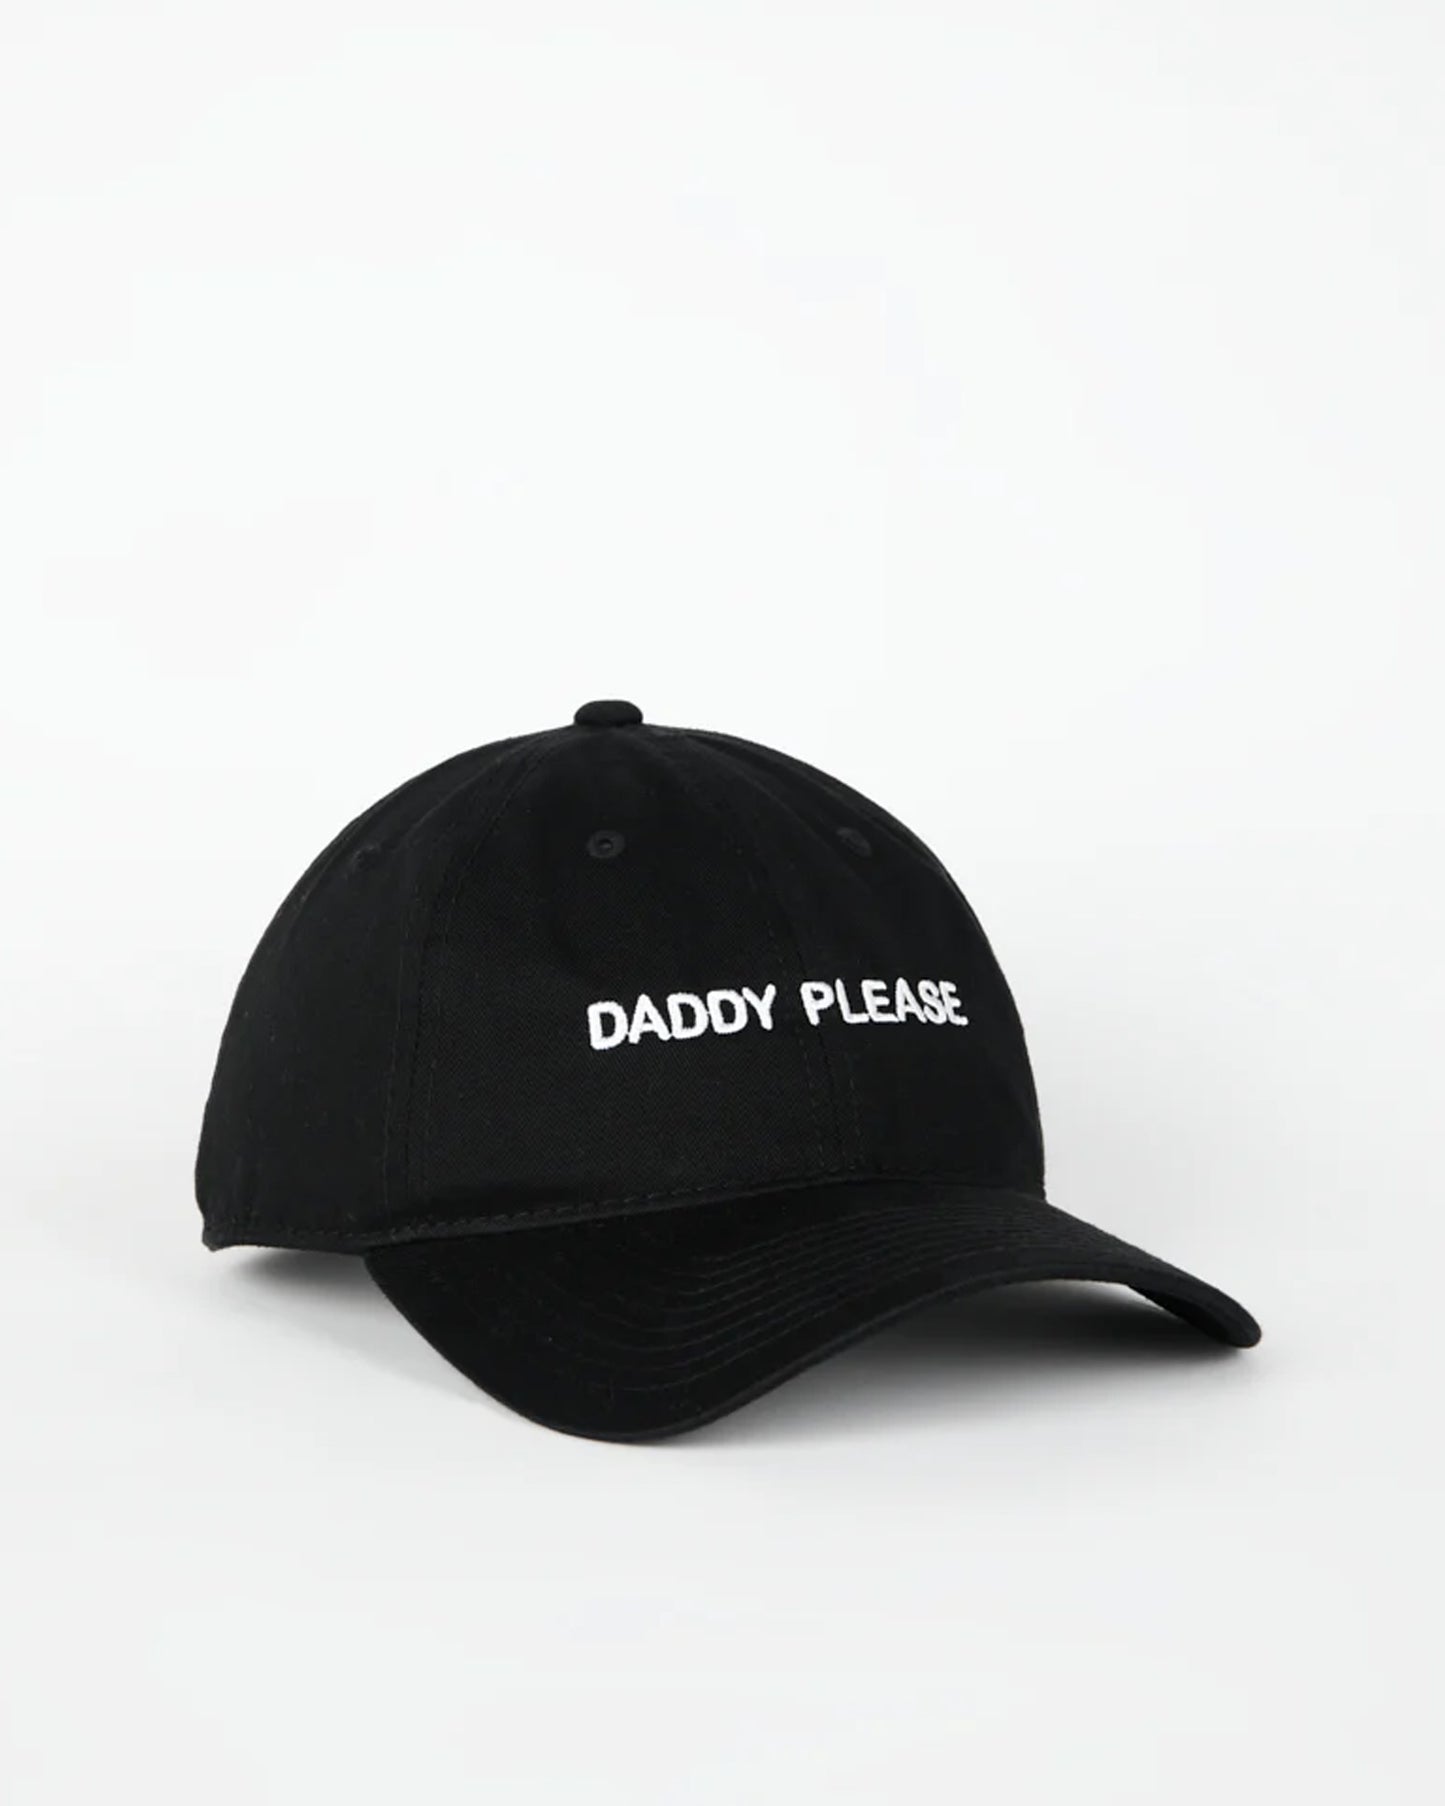 INTENTIONALLY BLANK Slogan Cap in "Daddy Please" available at Lahn.shop